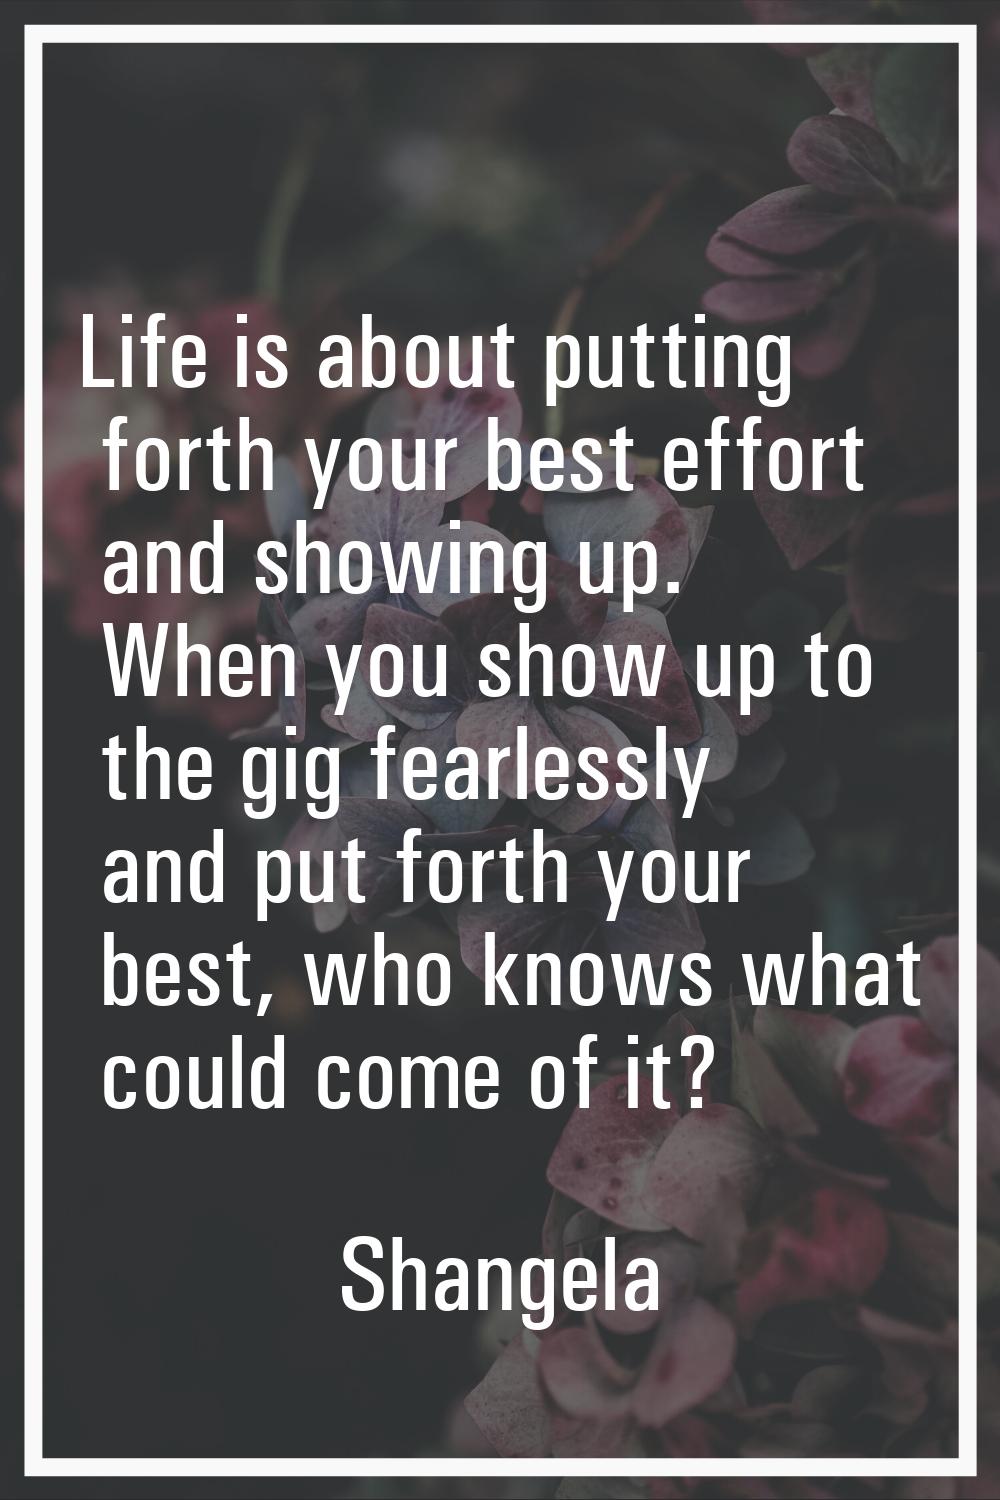 Life is about putting forth your best effort and showing up. When you show up to the gig fearlessly